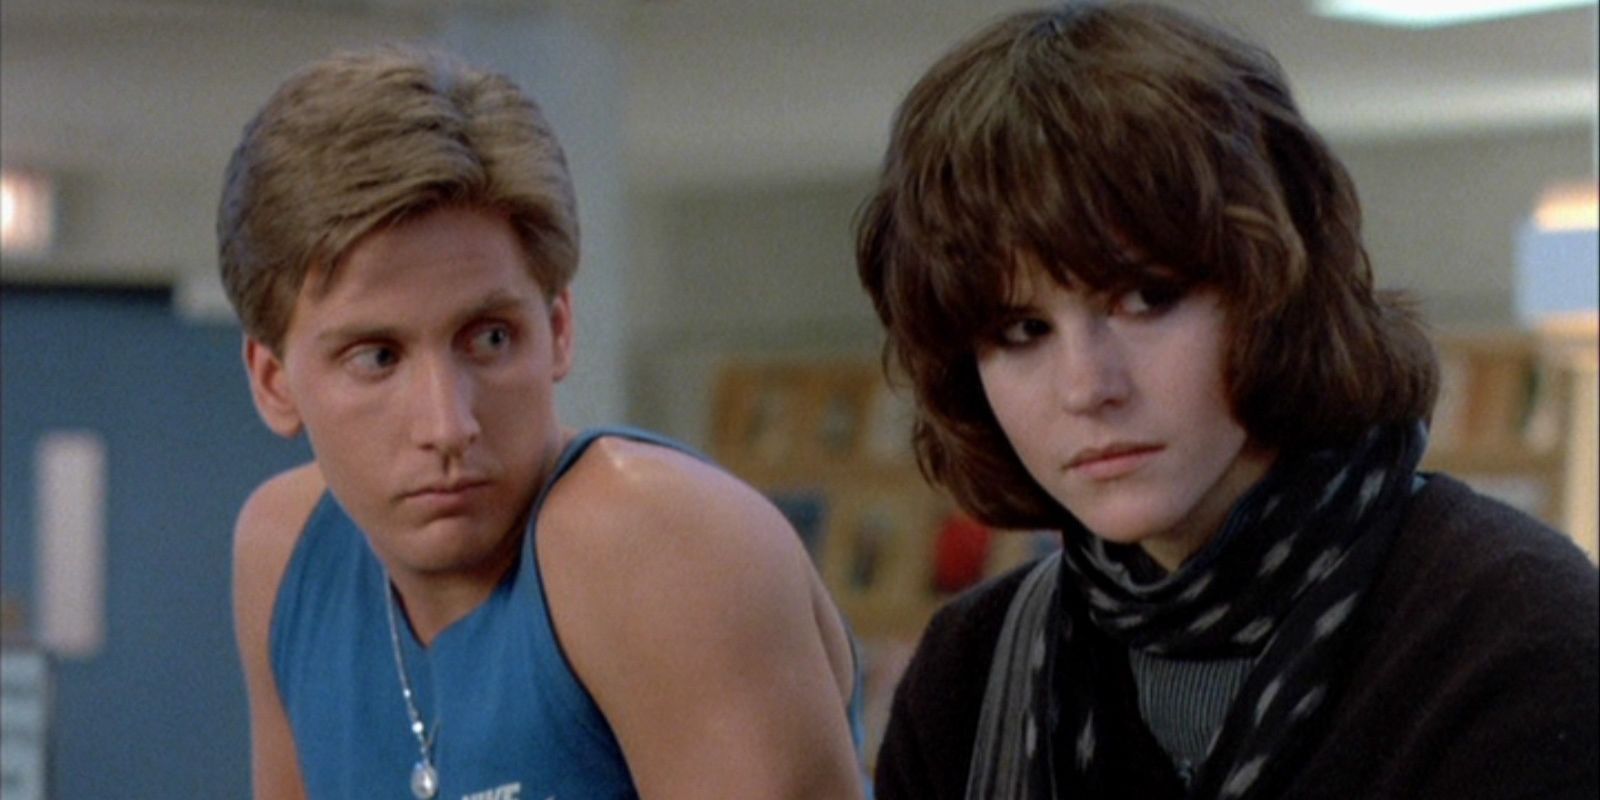 Emilio Estevez and Ally Sheedy sit and look in a library in The Breakfast Club.